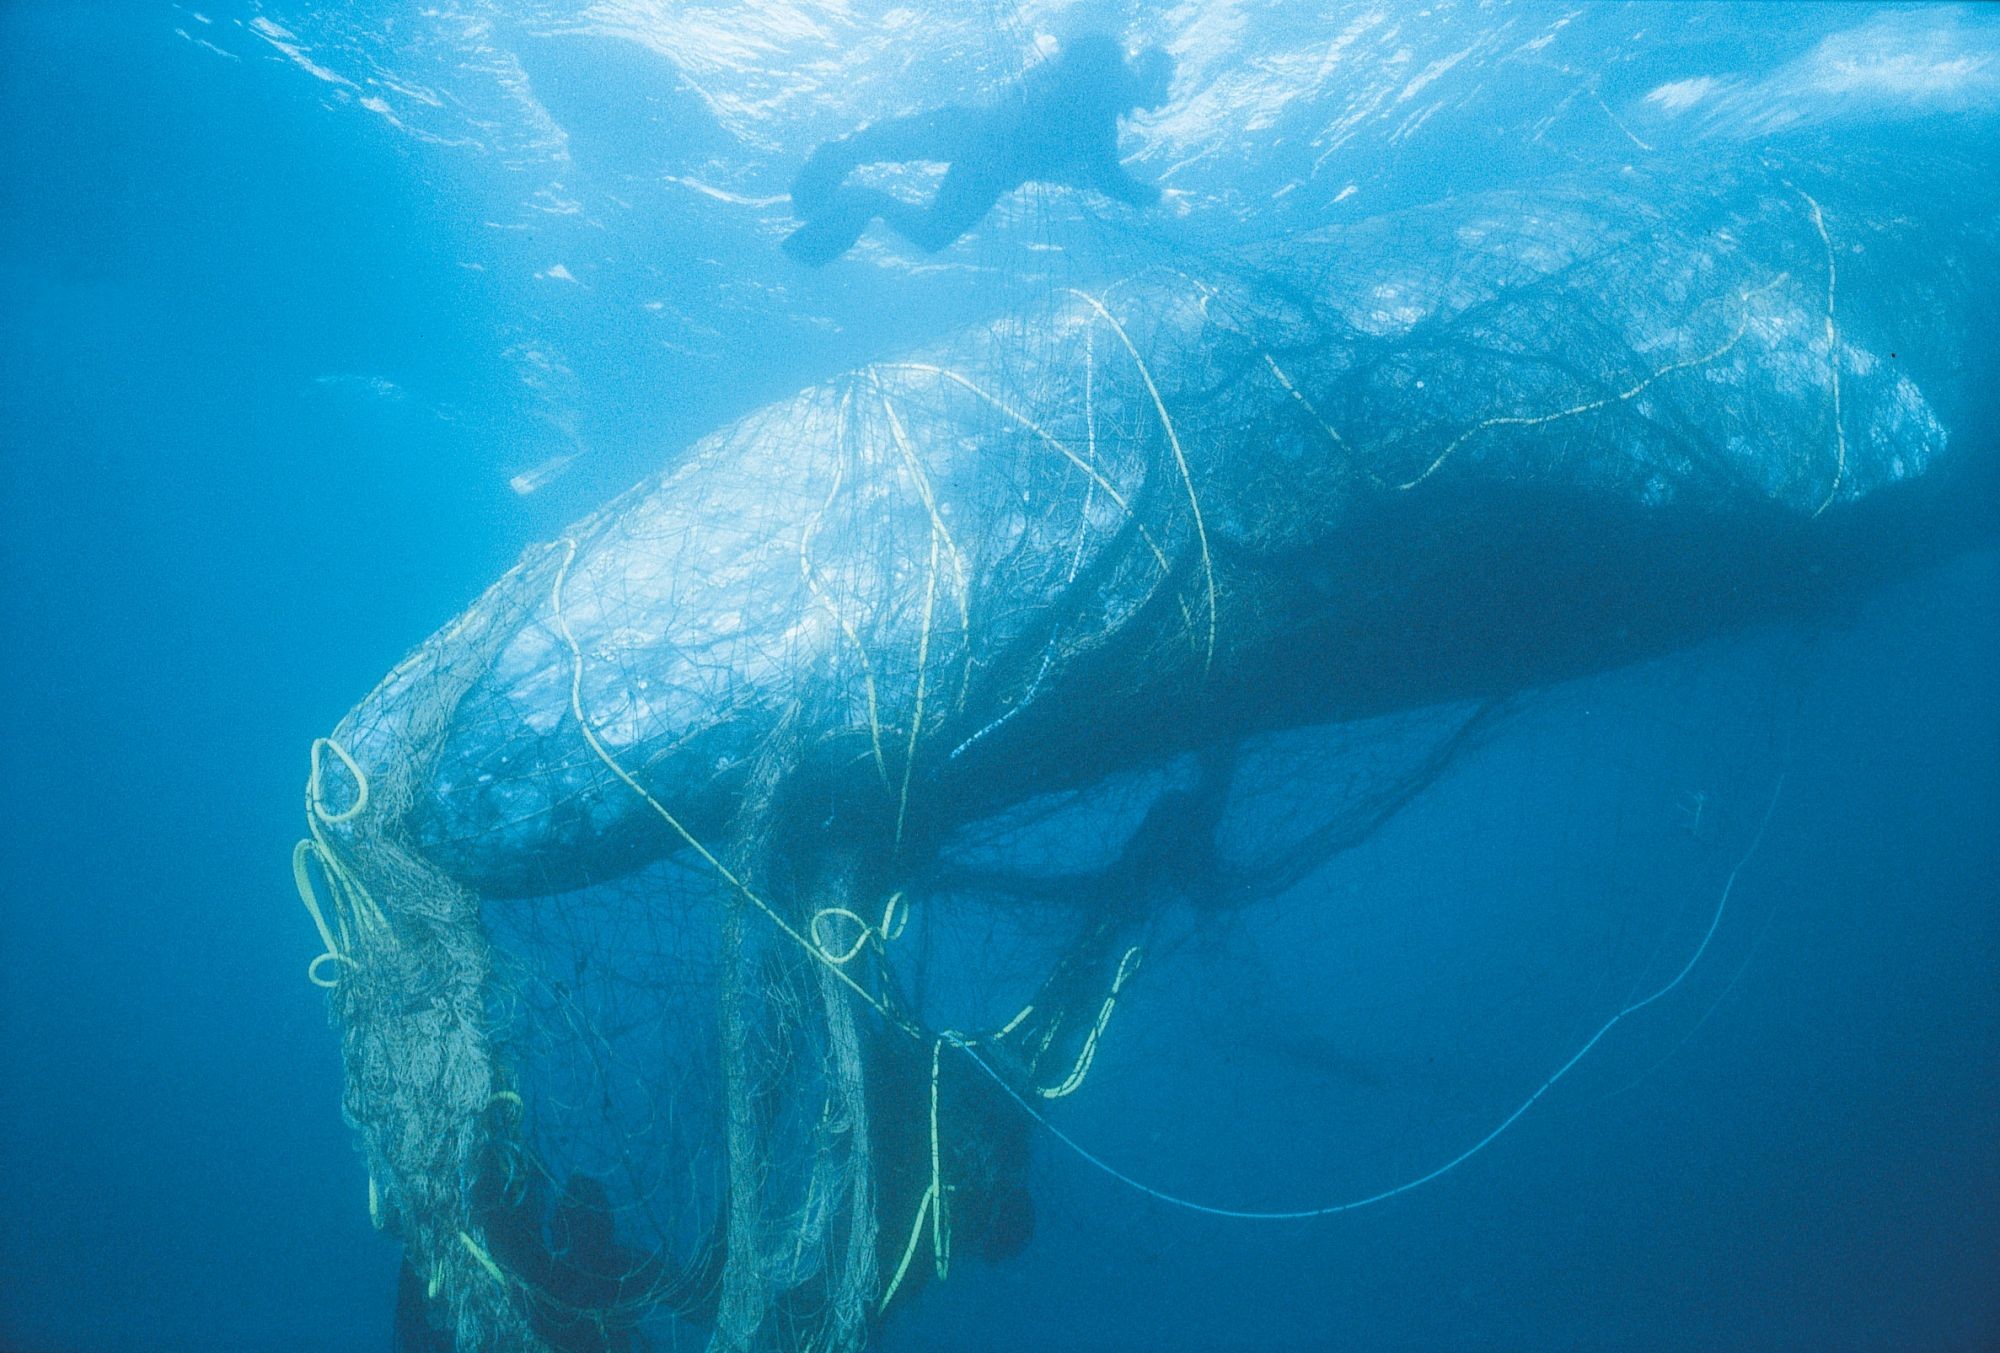 A gray whale entangled in netting